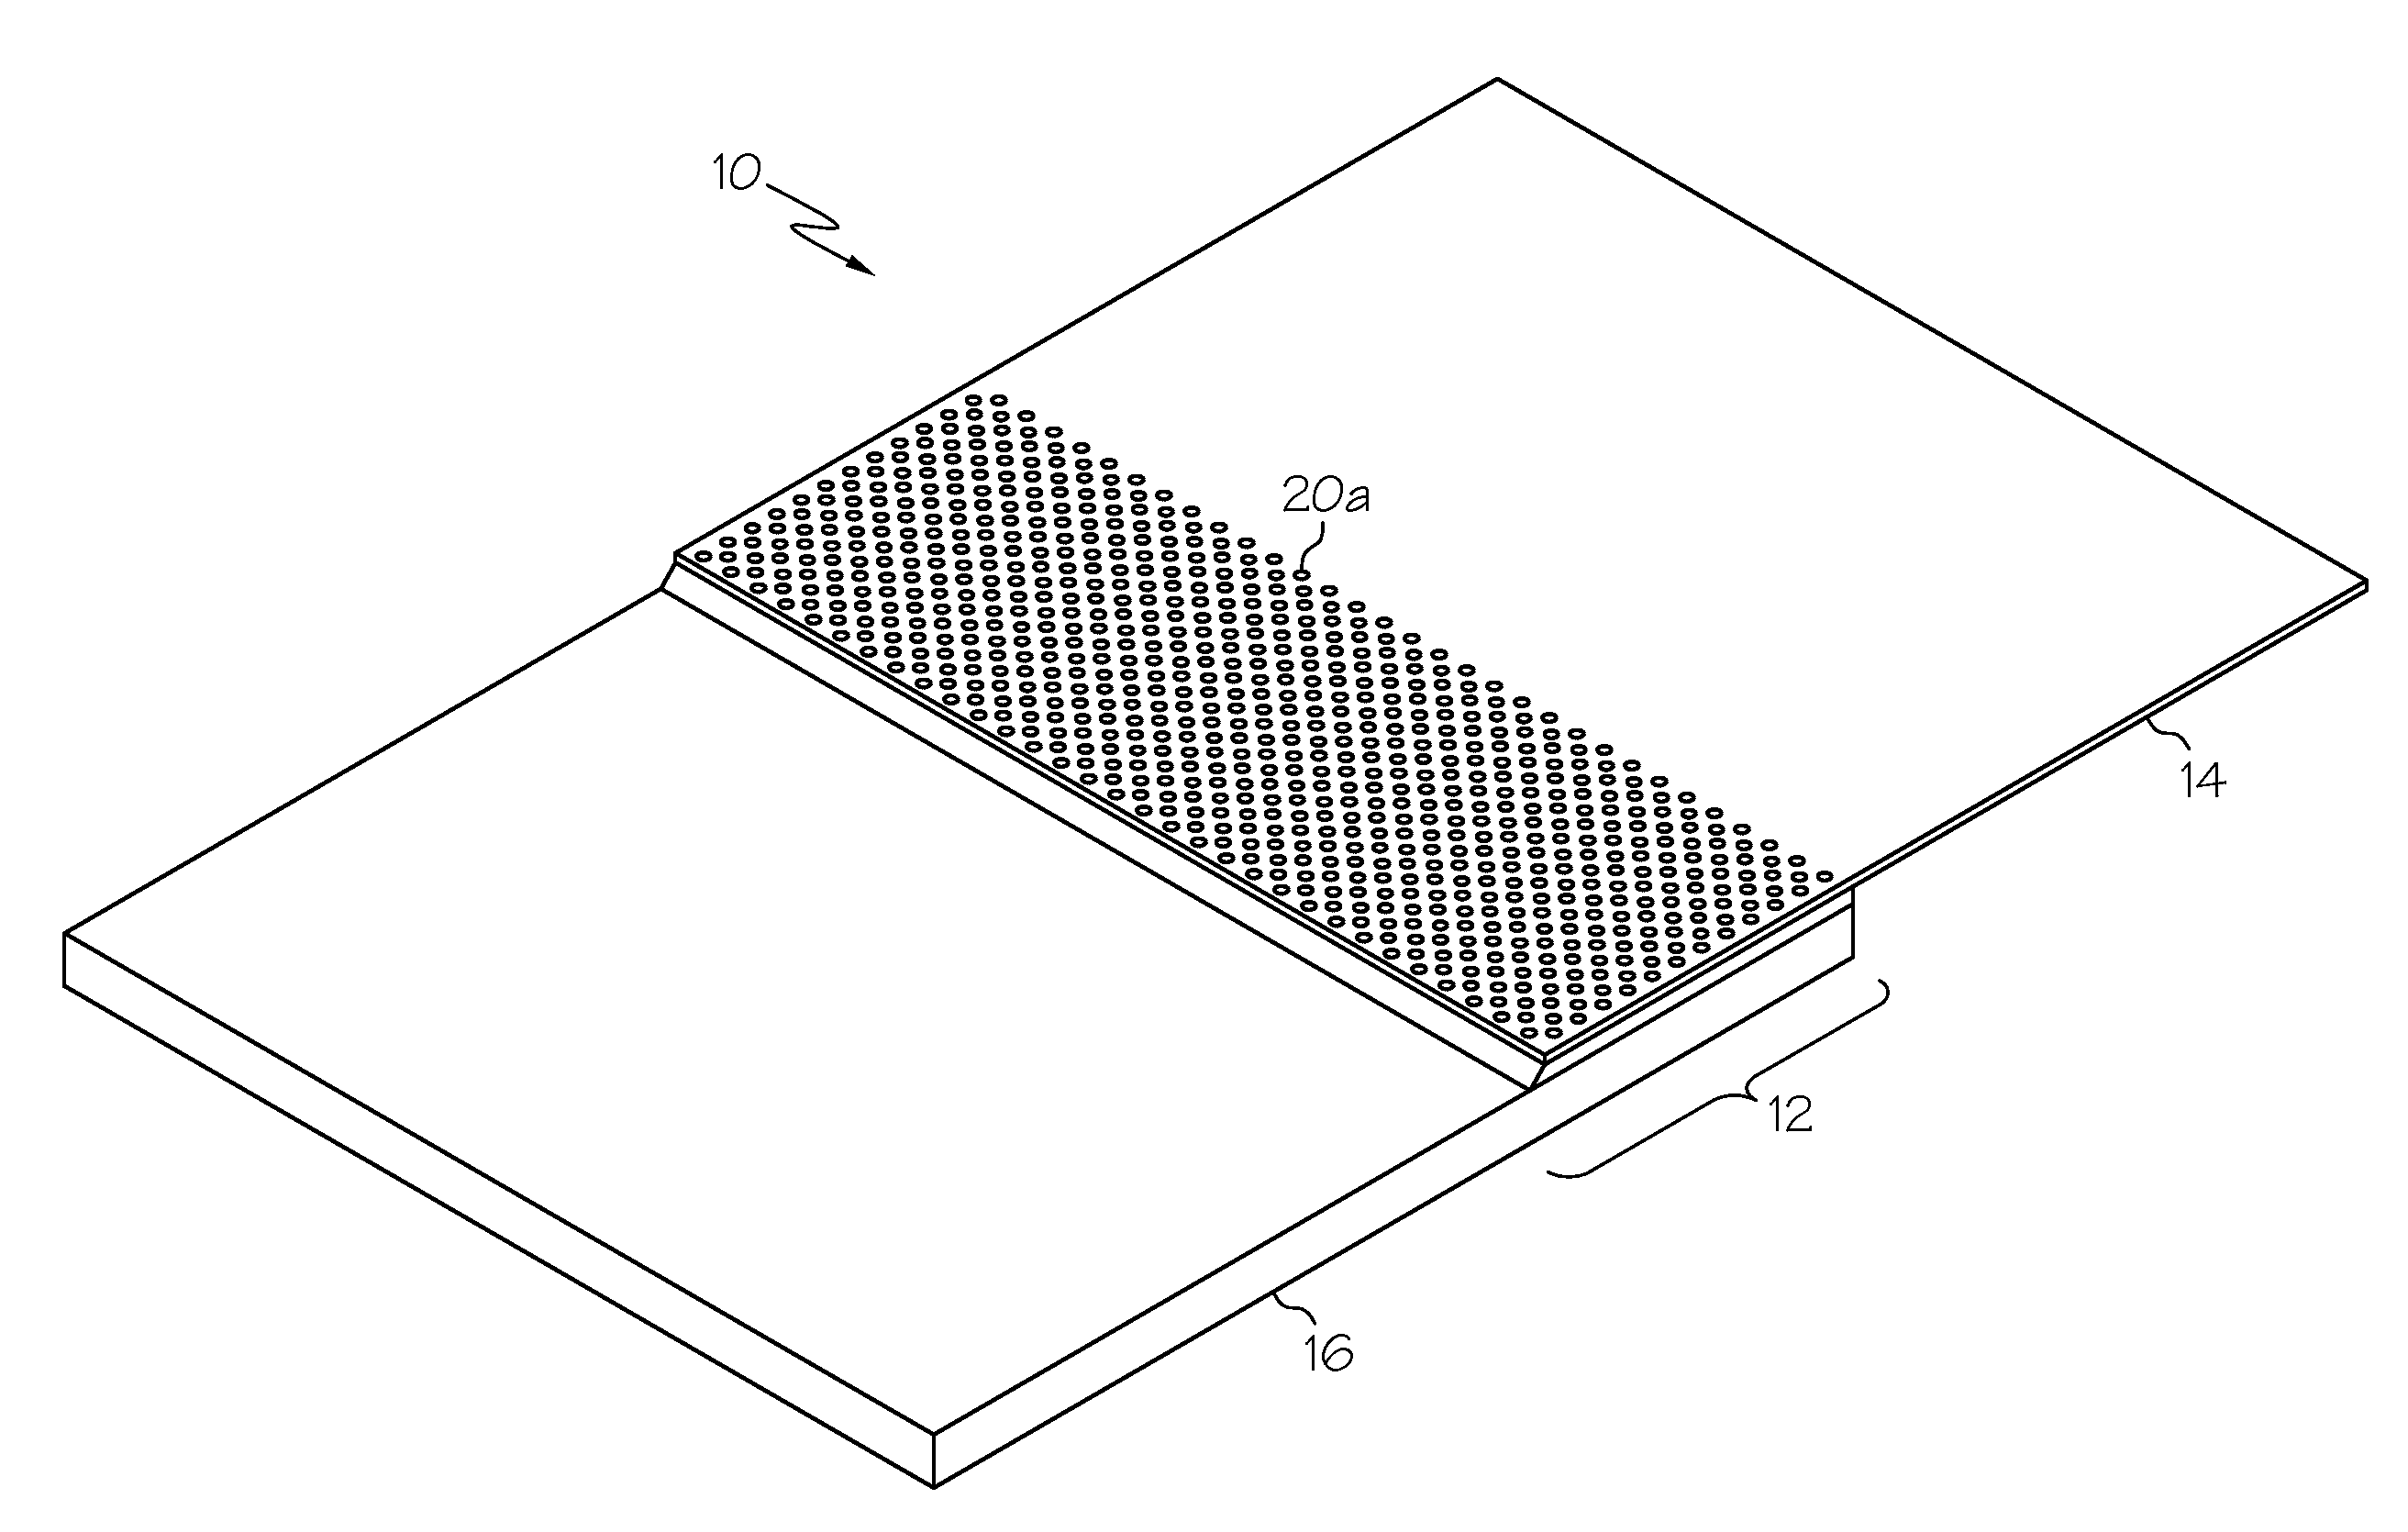 Bonded assemblies and methods for improving bond strength of a joint